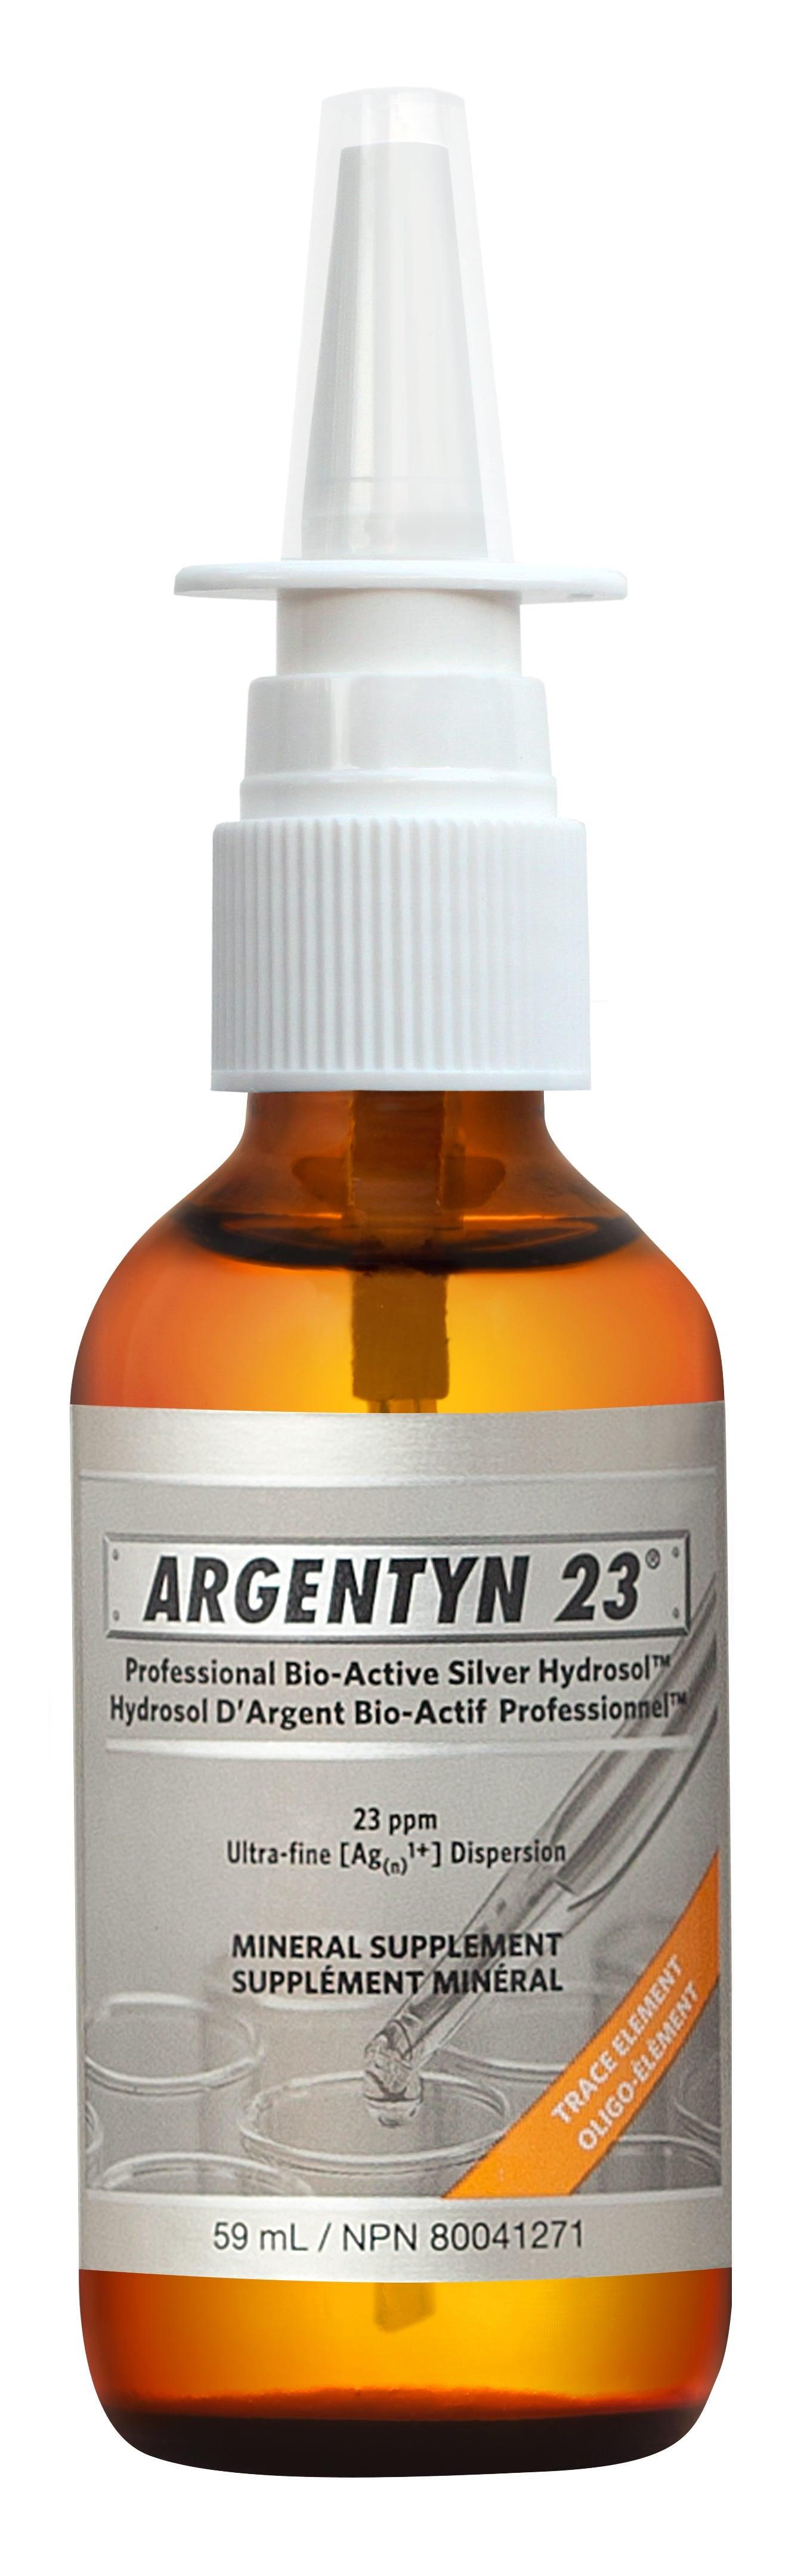 Argentyn 23 Products & Supplements Online